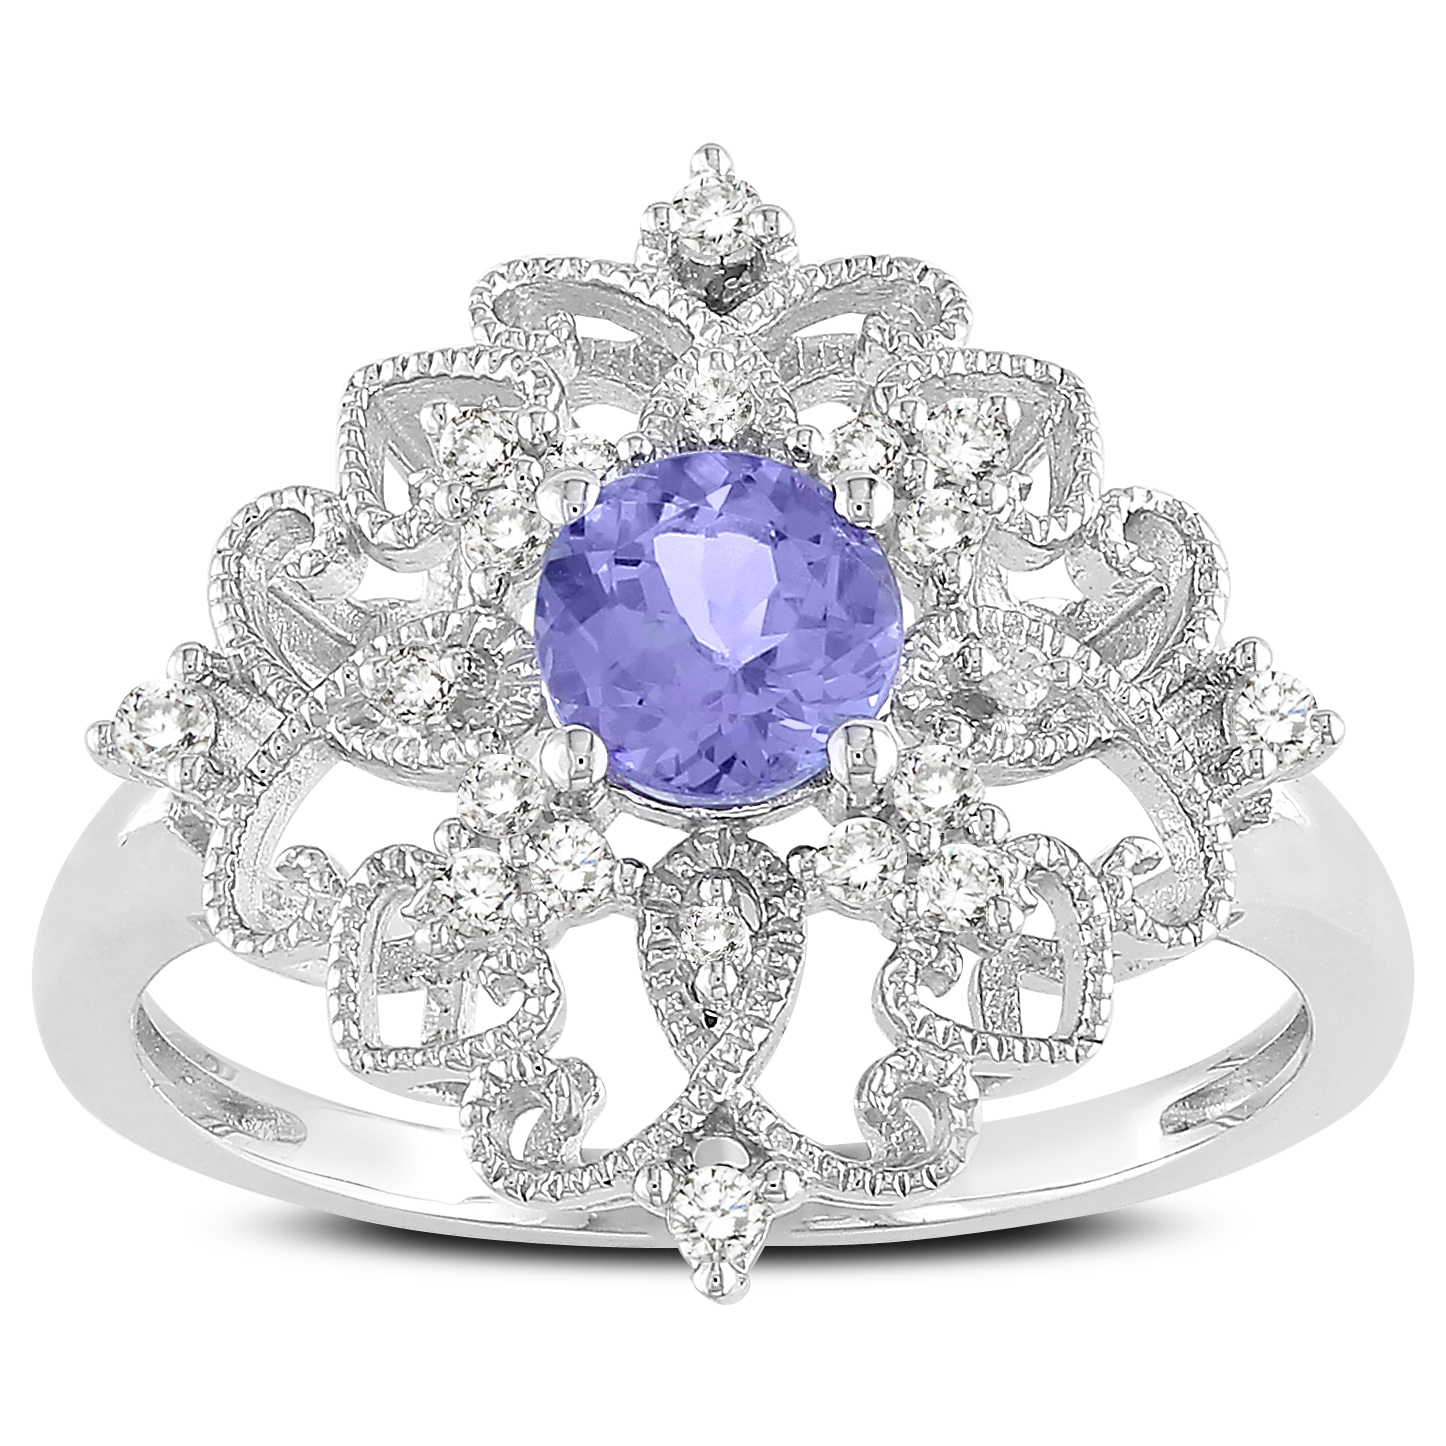 Amour 1/6 Carat T.W. Diamond and 0.54 Carat T.G.W. Tanzanite Fashion Ring in Sterling Silver GH I3